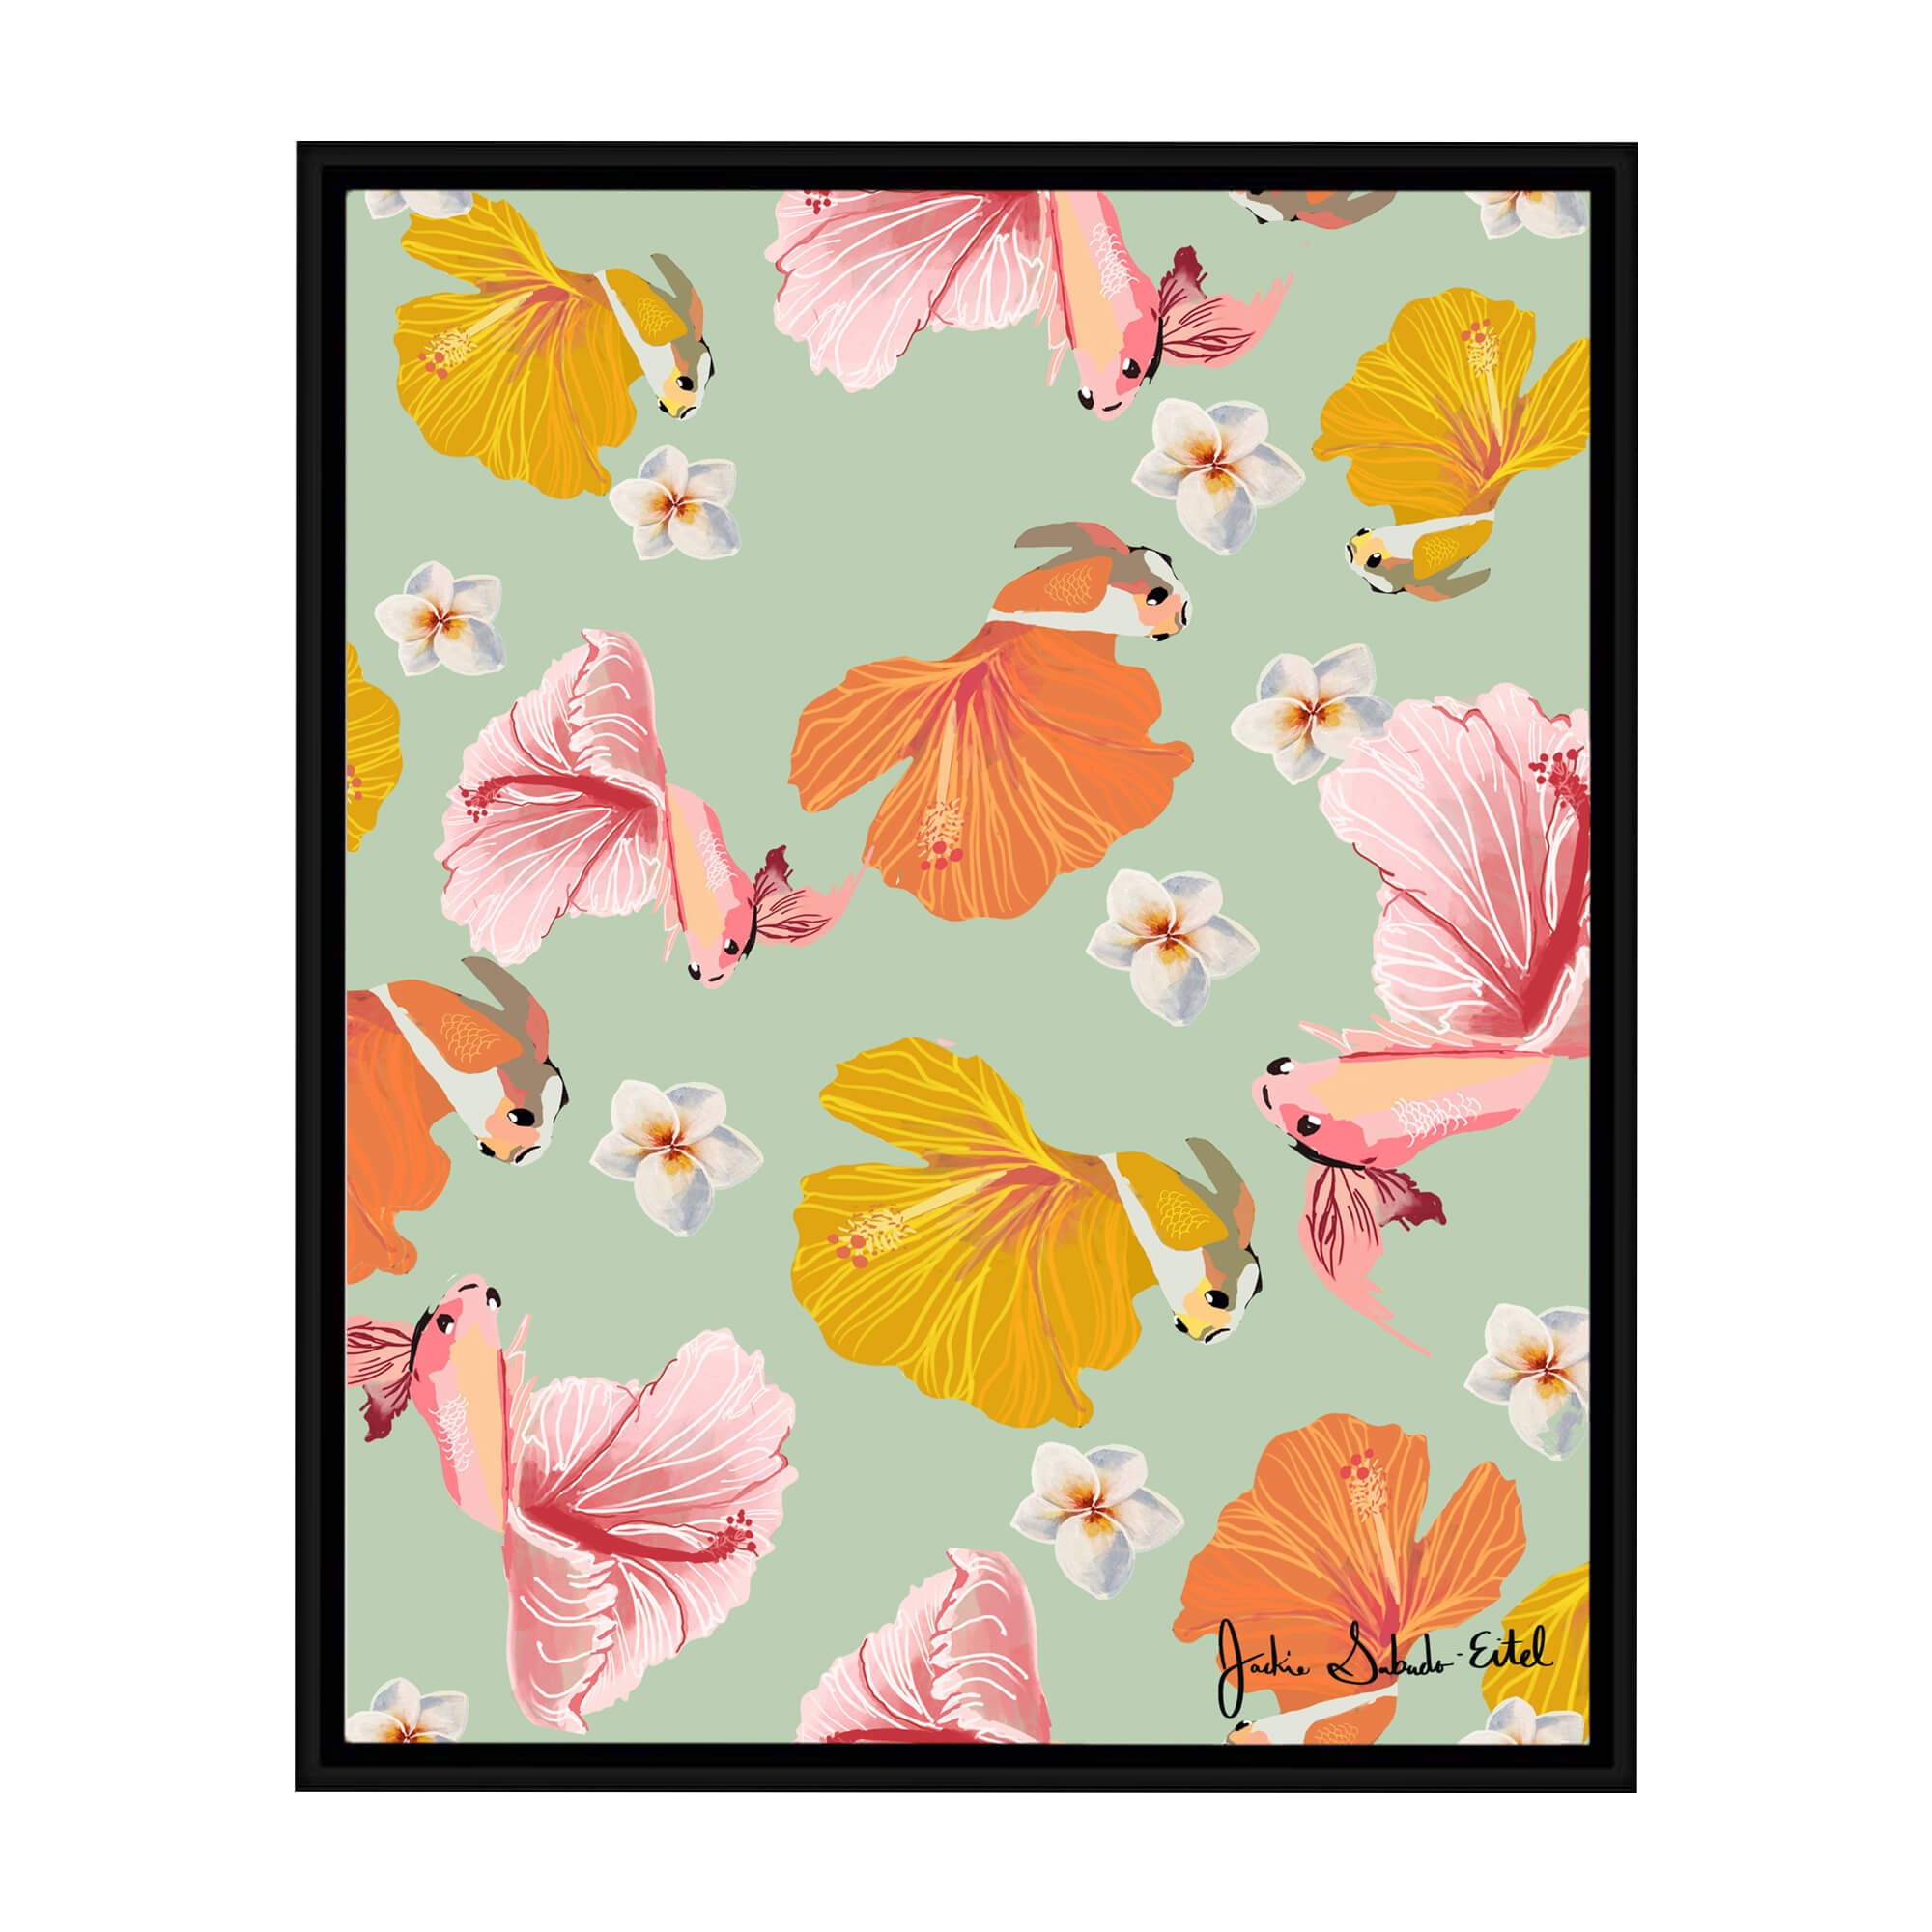 A framed canvas giclée print featuring colorful tropical fish with hibiscus flowers as tails and some beautiful plumerias by Hawaii artist Jackie Eitel